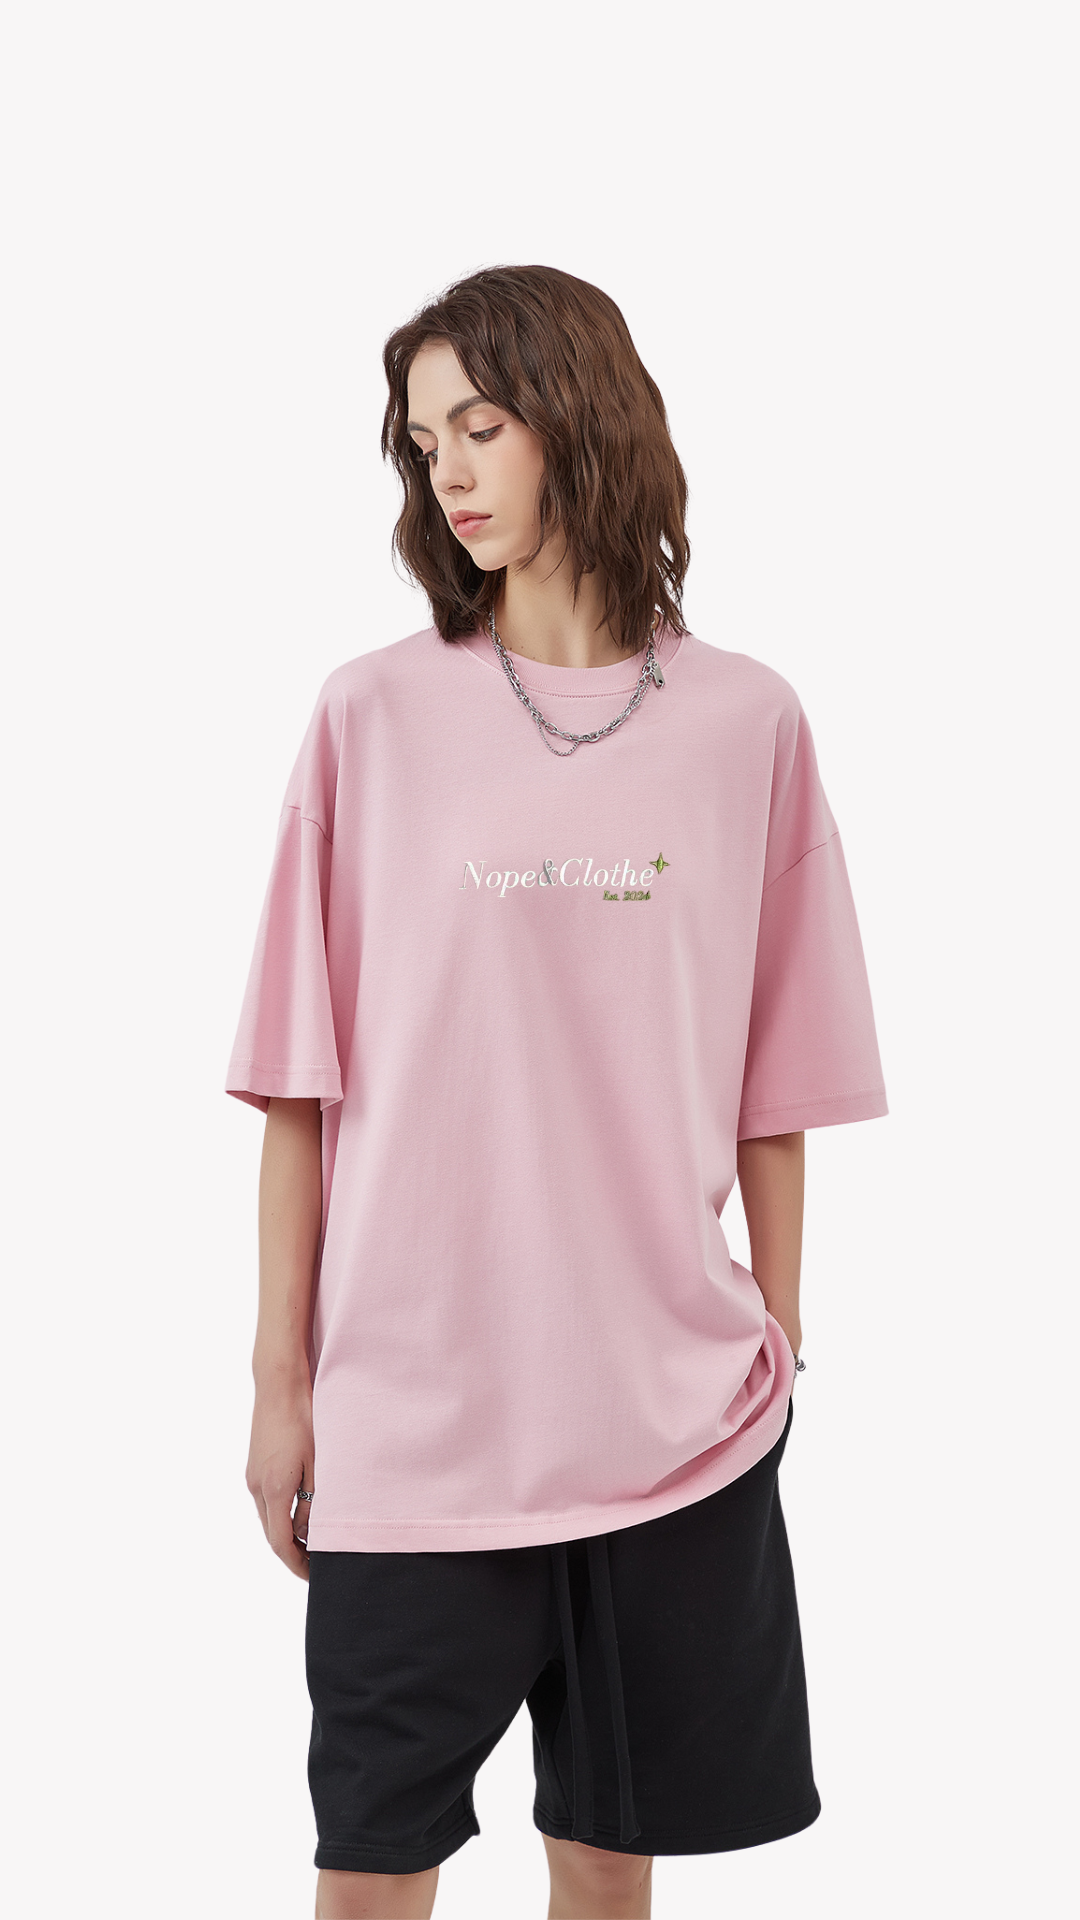 Cotton Candy Essence Tee